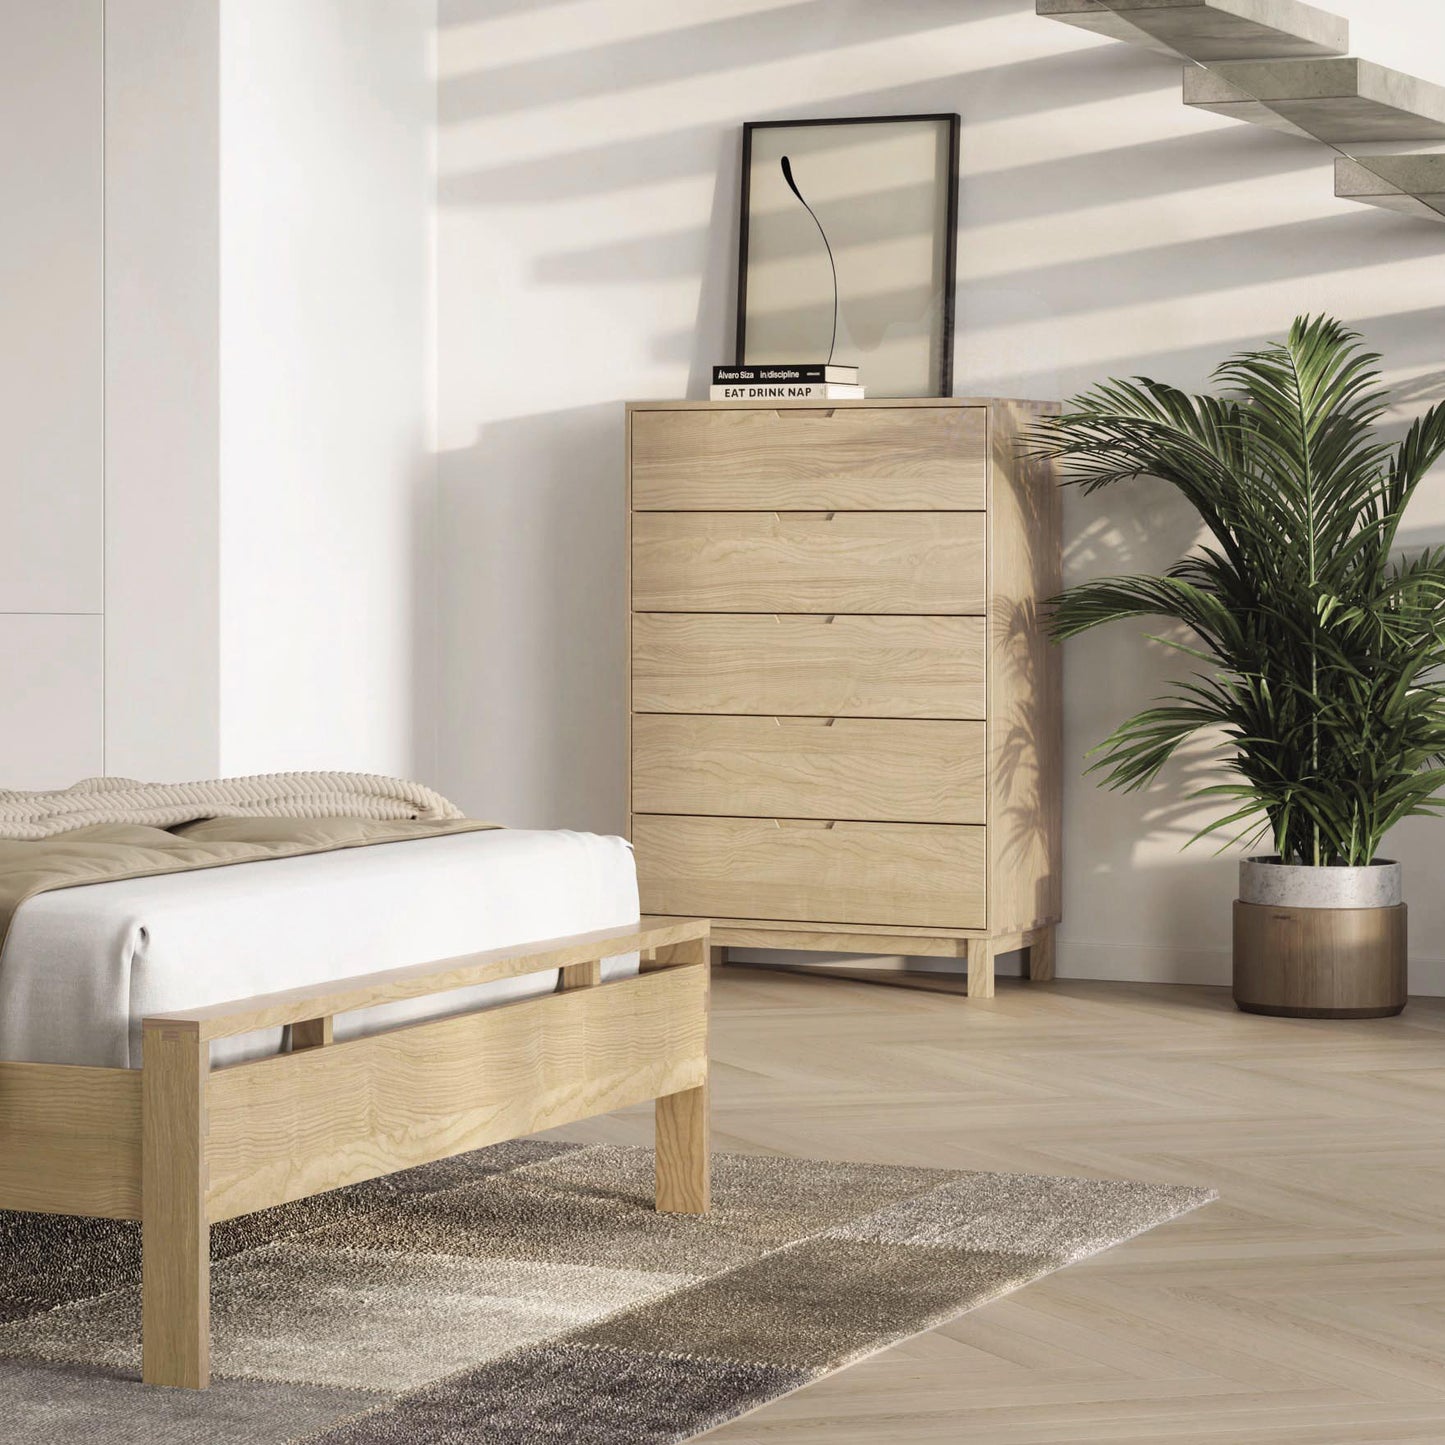 A modern bedroom featuring the Copeland Furniture Oslo 5-Drawer Wide Chest, with a solid oak hardwood bed frame and matching Oslo Bedroom Furniture Collection, a plant in a metallic pot, a small mirror on the dresser.